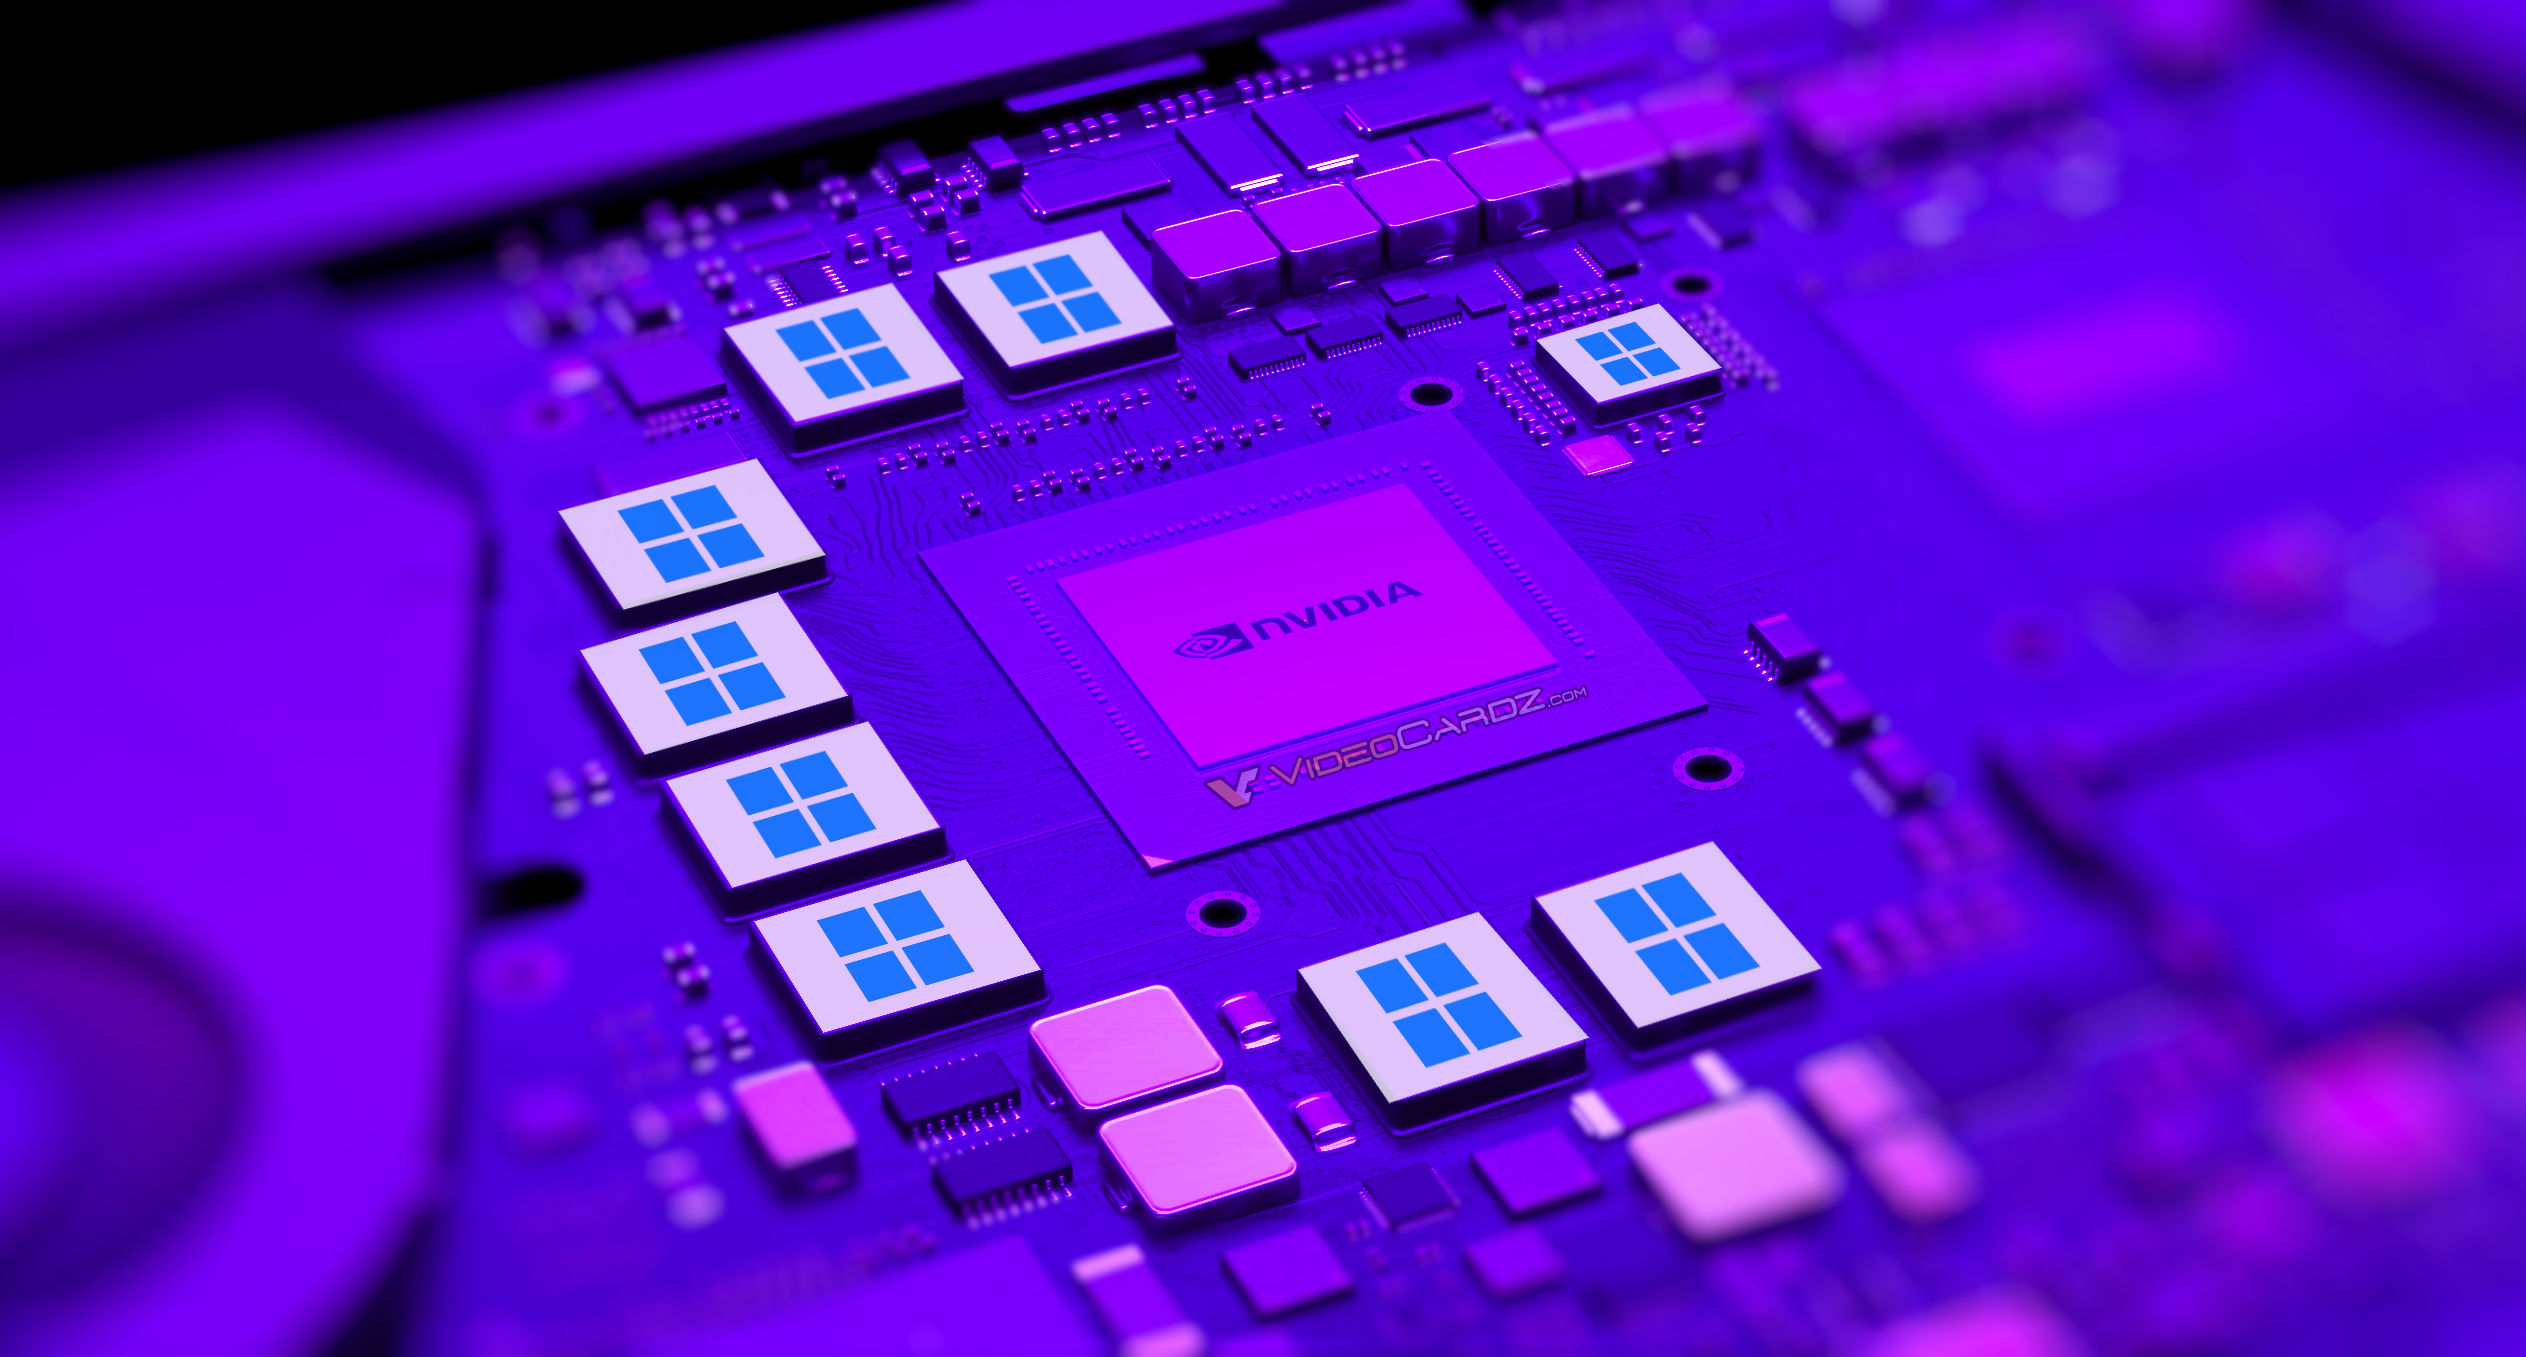 Tiny11, A Toned-Down Version of Windows 11, Can Run On A GPU With 4 GB VRAM